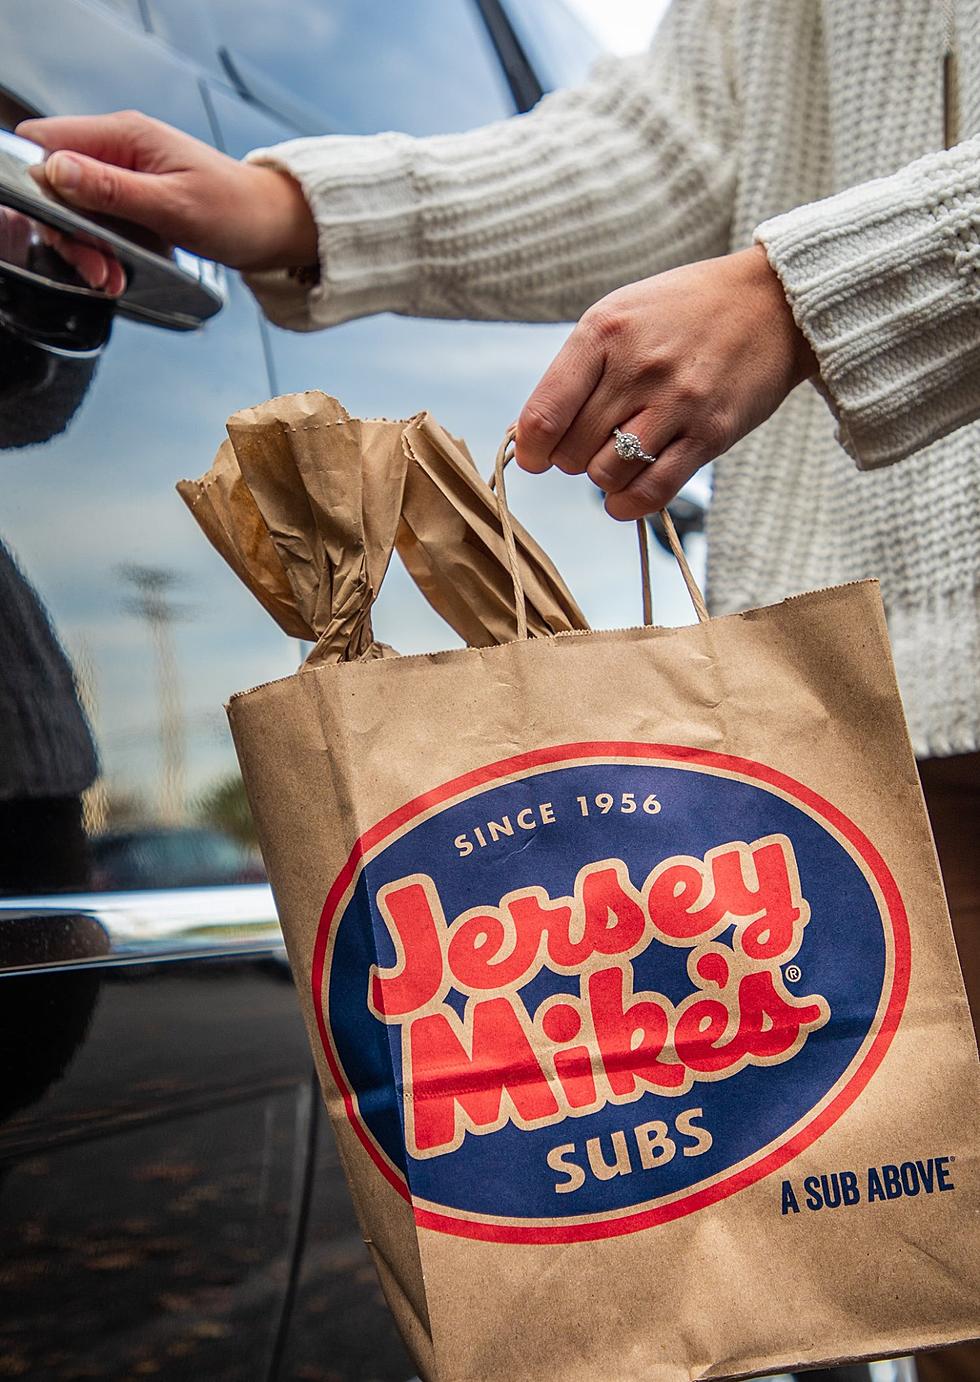 5 Things You Didn't Know About Jersey Mike's Subs